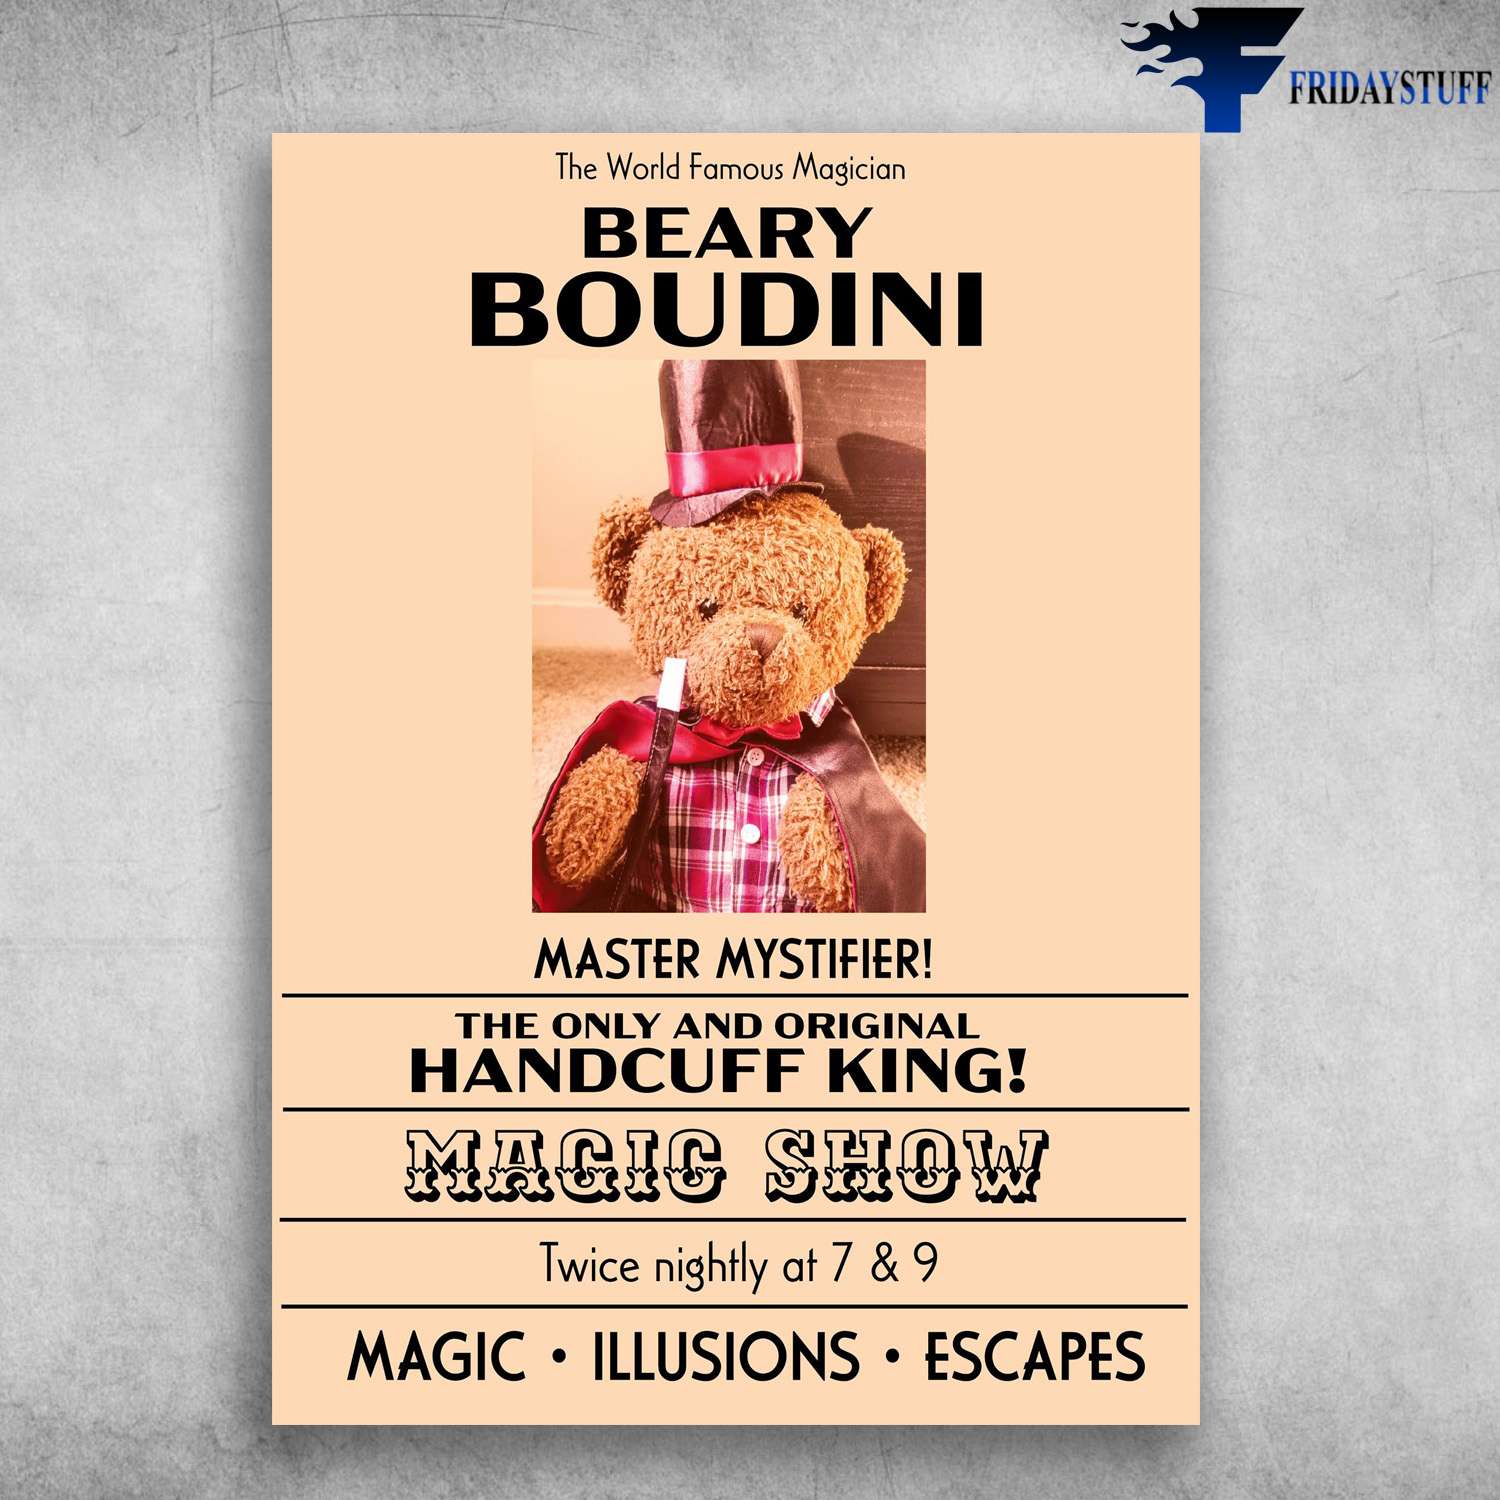 The World Famous Magician, Beary Boudini, Master Mystifier, The Only And Original Handcuff King, Magic Show